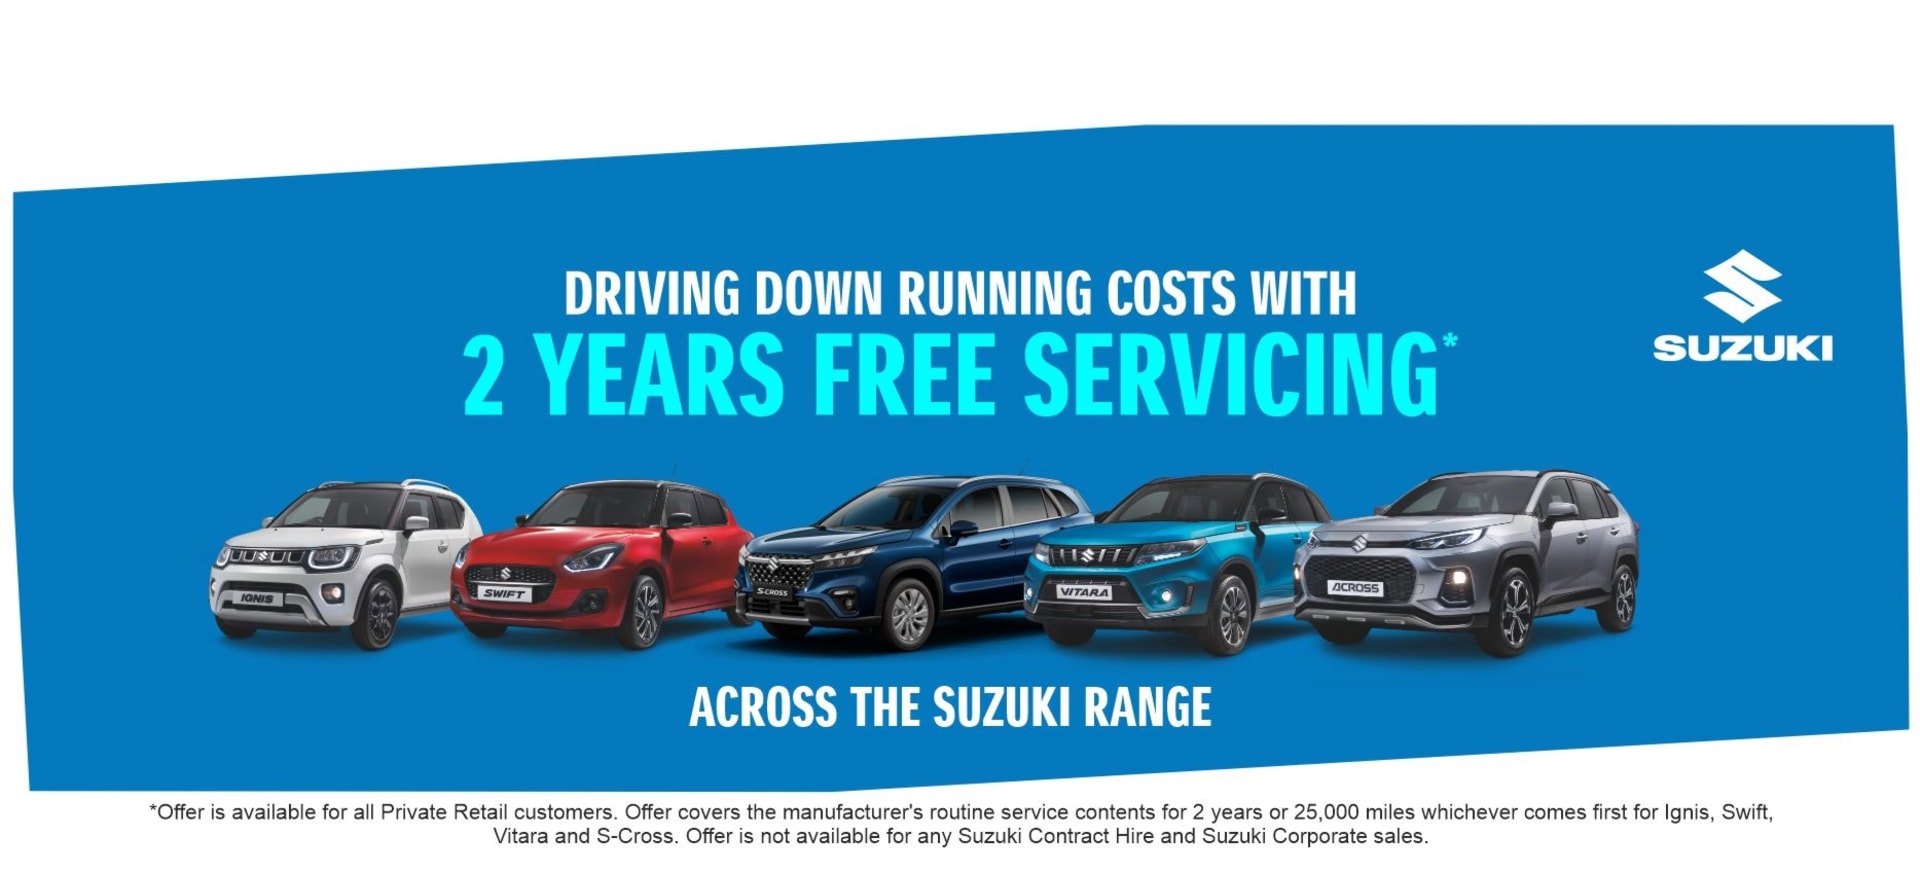 2 Years Free Servicing banner